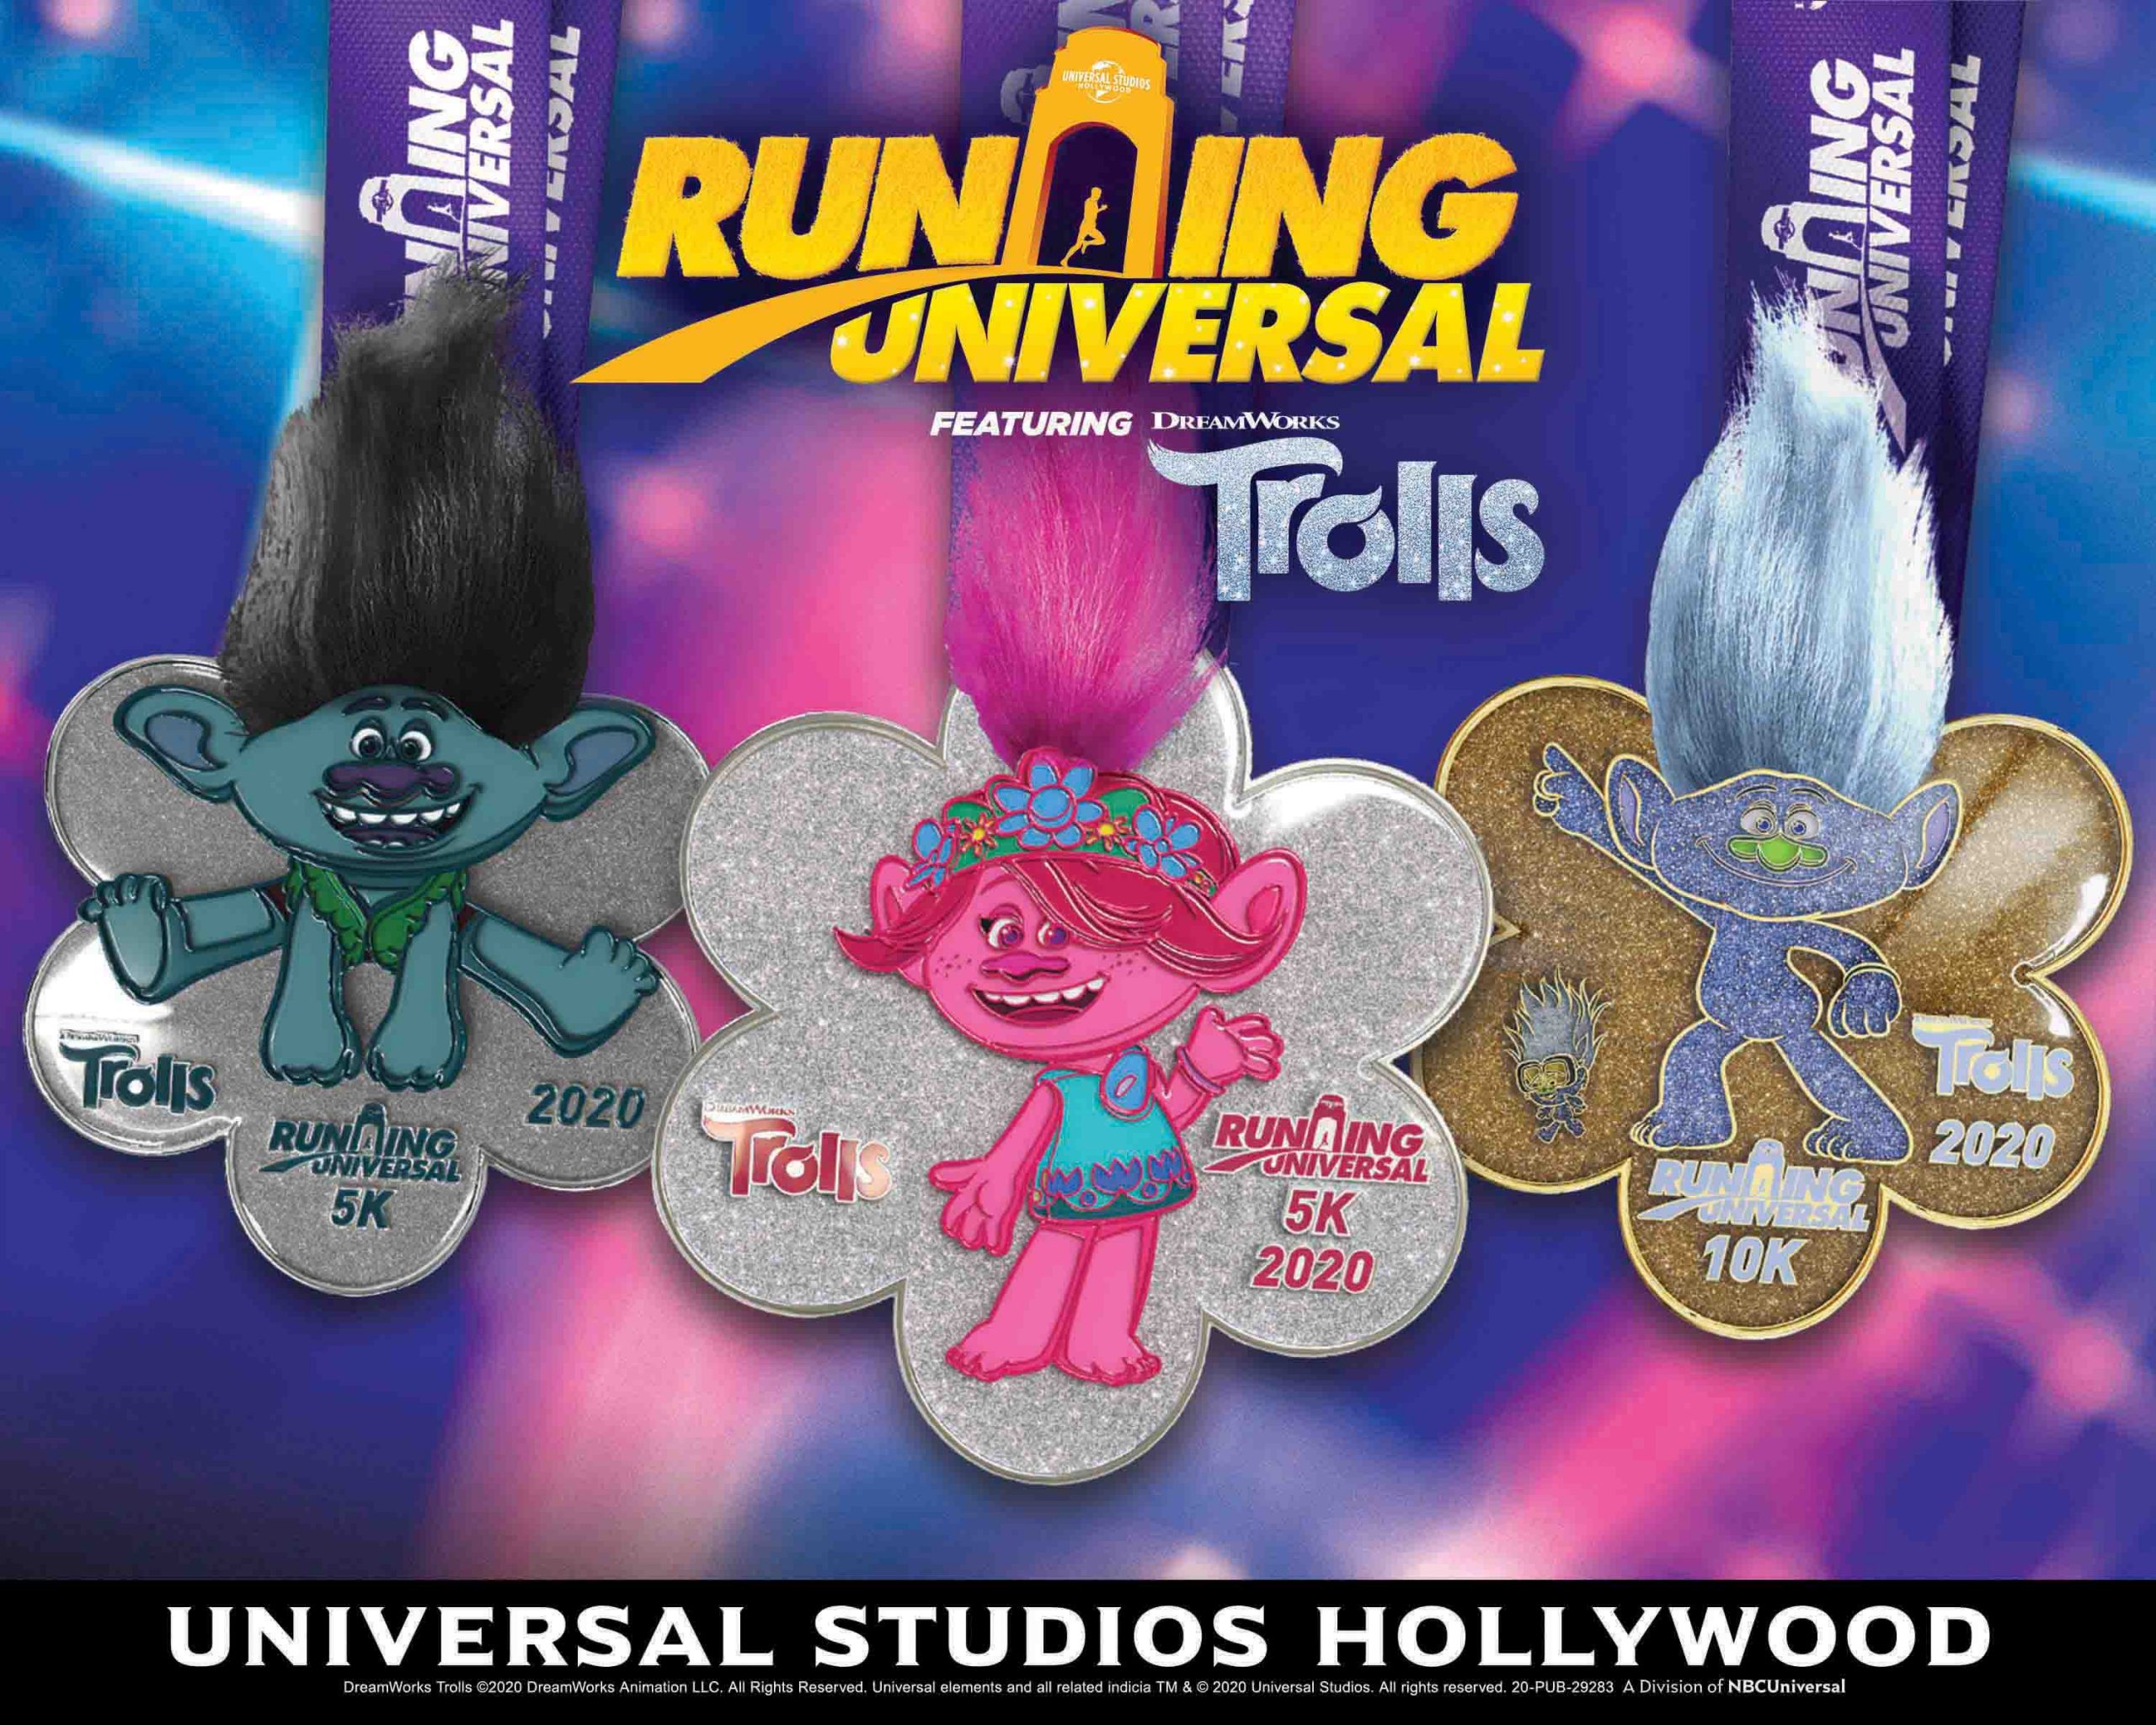 Running Universal Features Characters From DreamWork’s Trolls on Sunday, April 26th